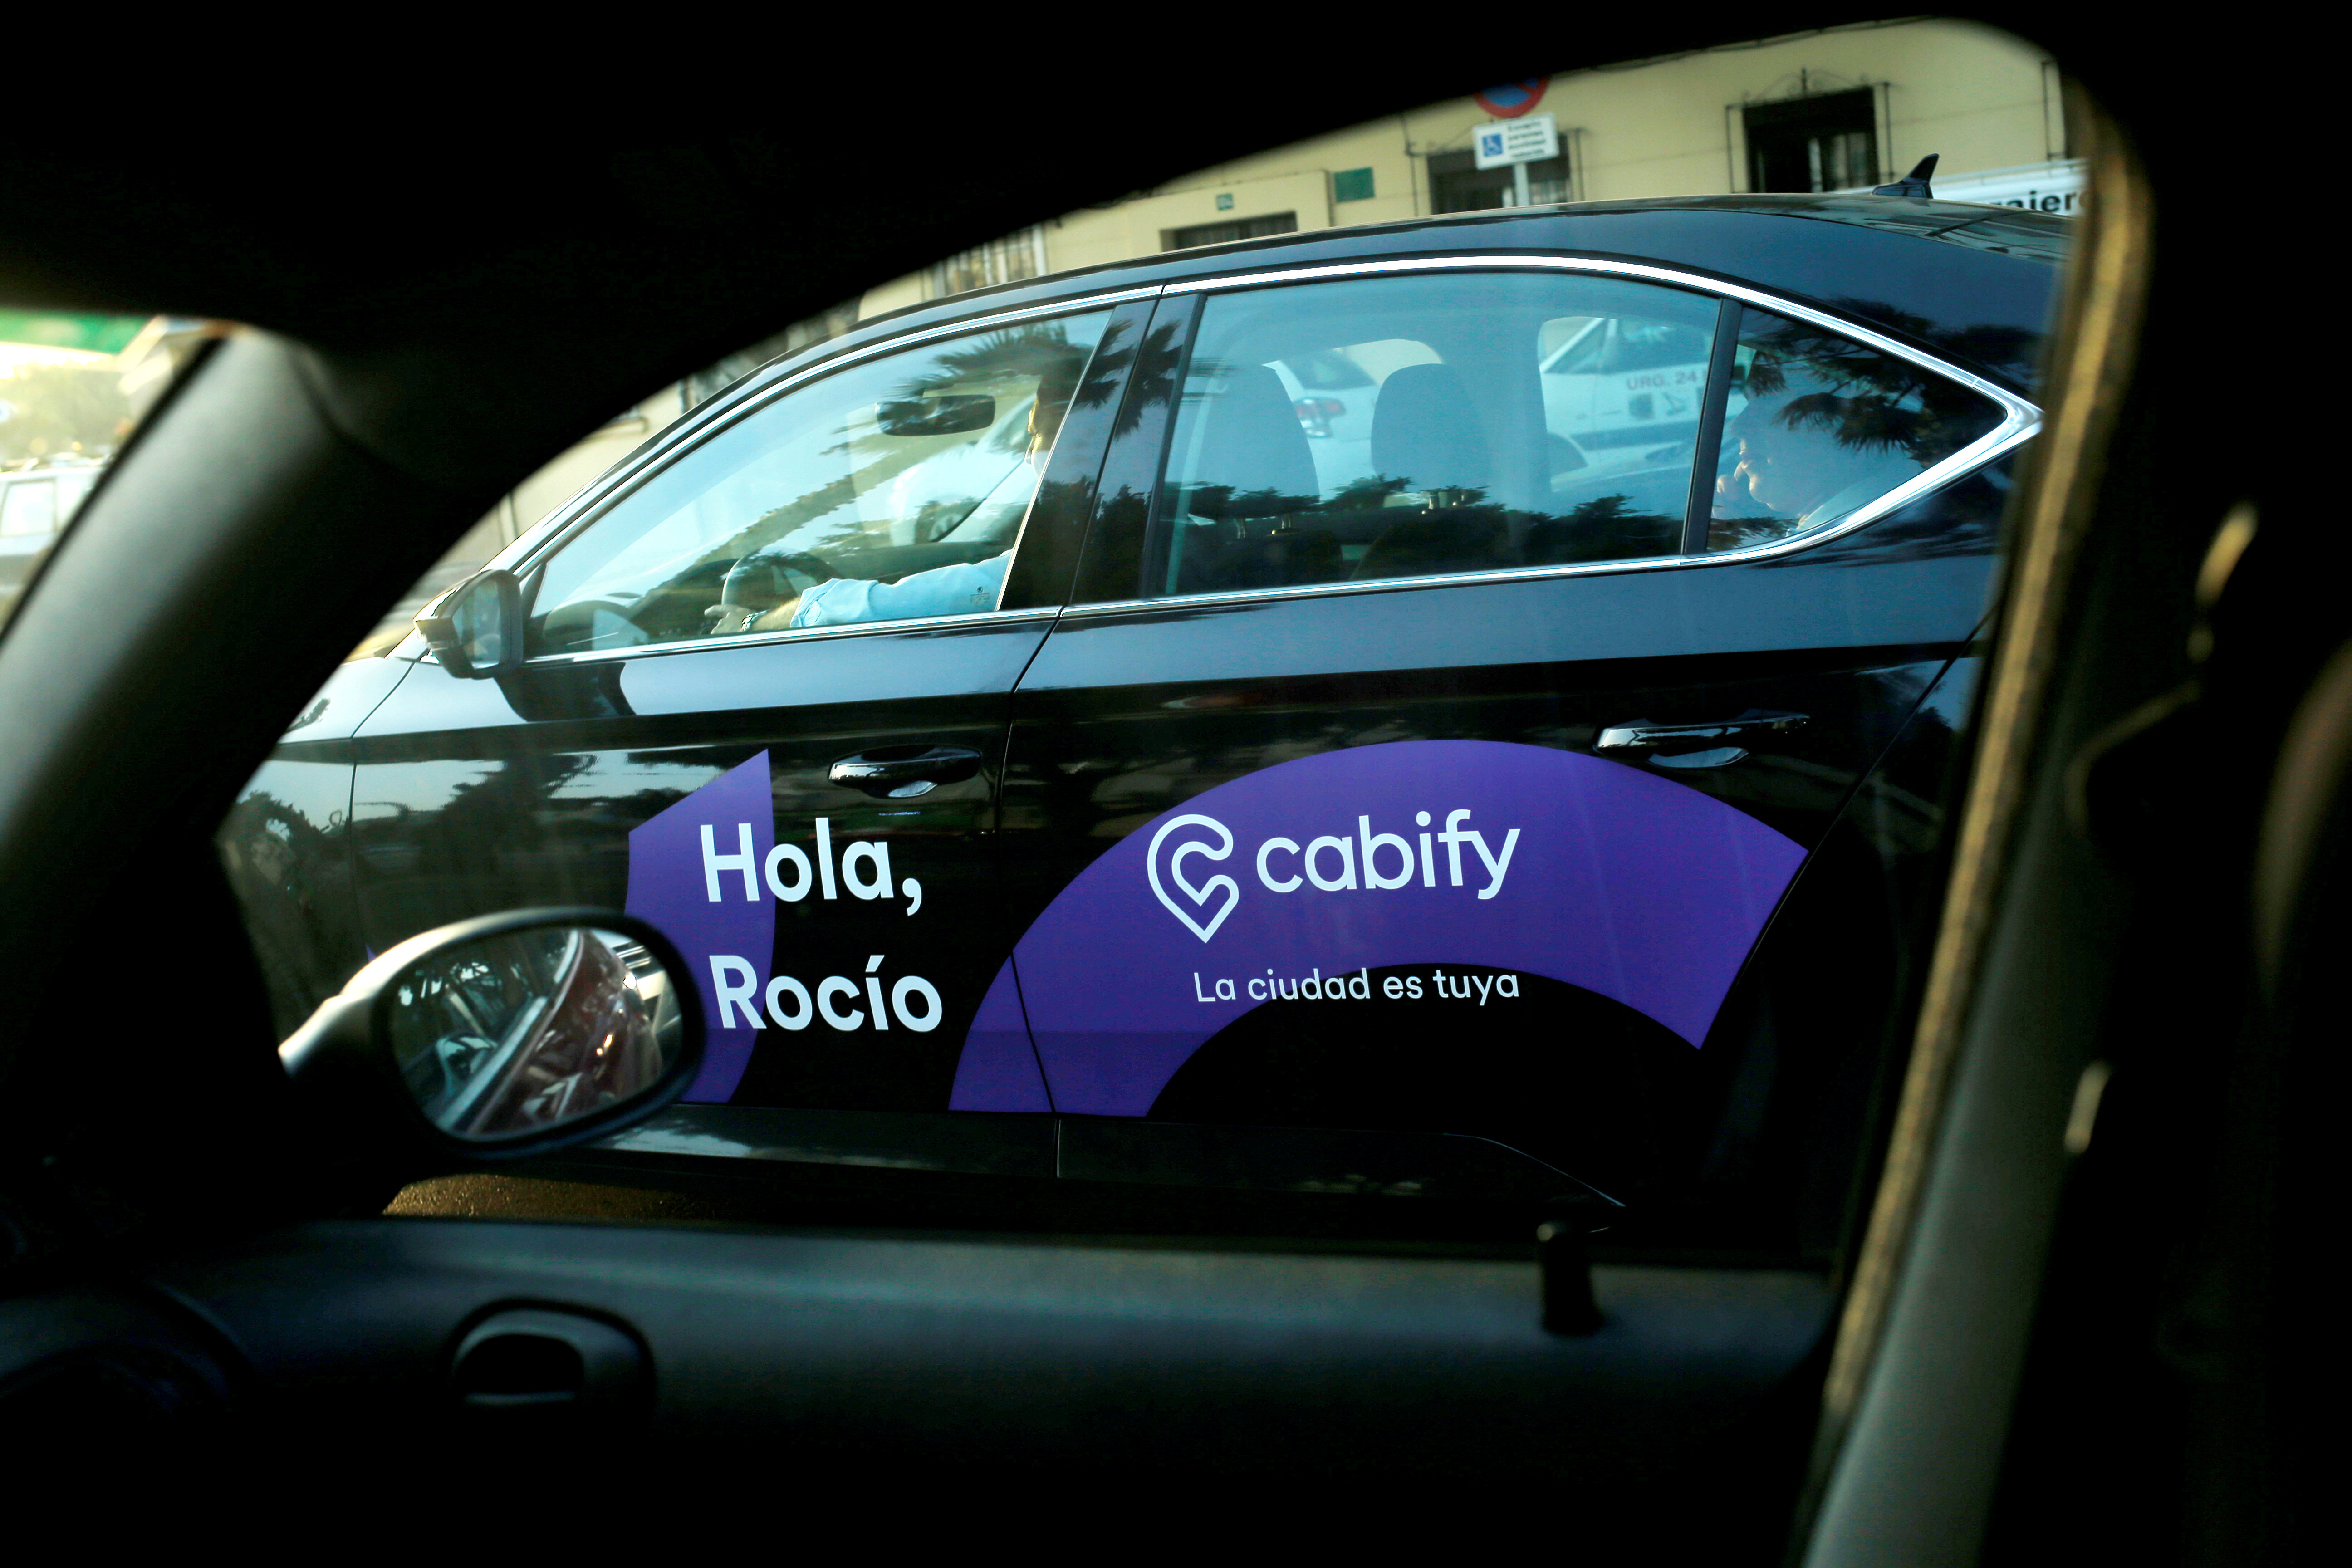 A Cabify taxi car is seen through the window of a car in Malaga, southern Spain August 3, 2018. REUTERS/Jon Nazca/File Photo